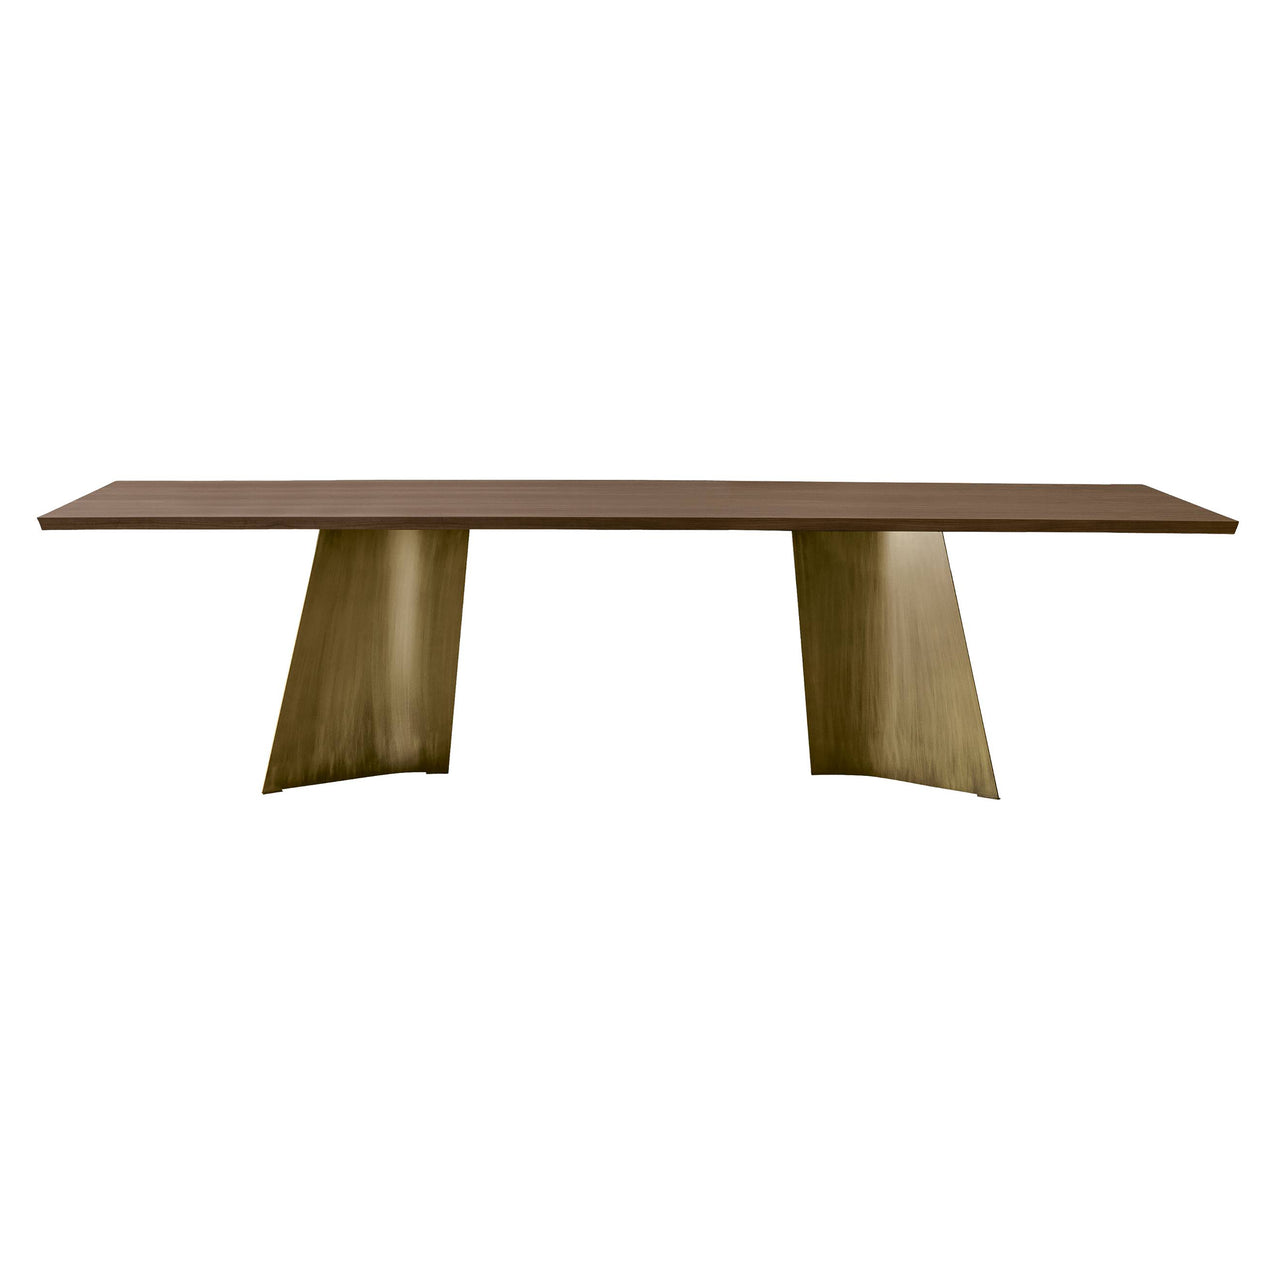 Maggese Dining Table: Large - 118.1